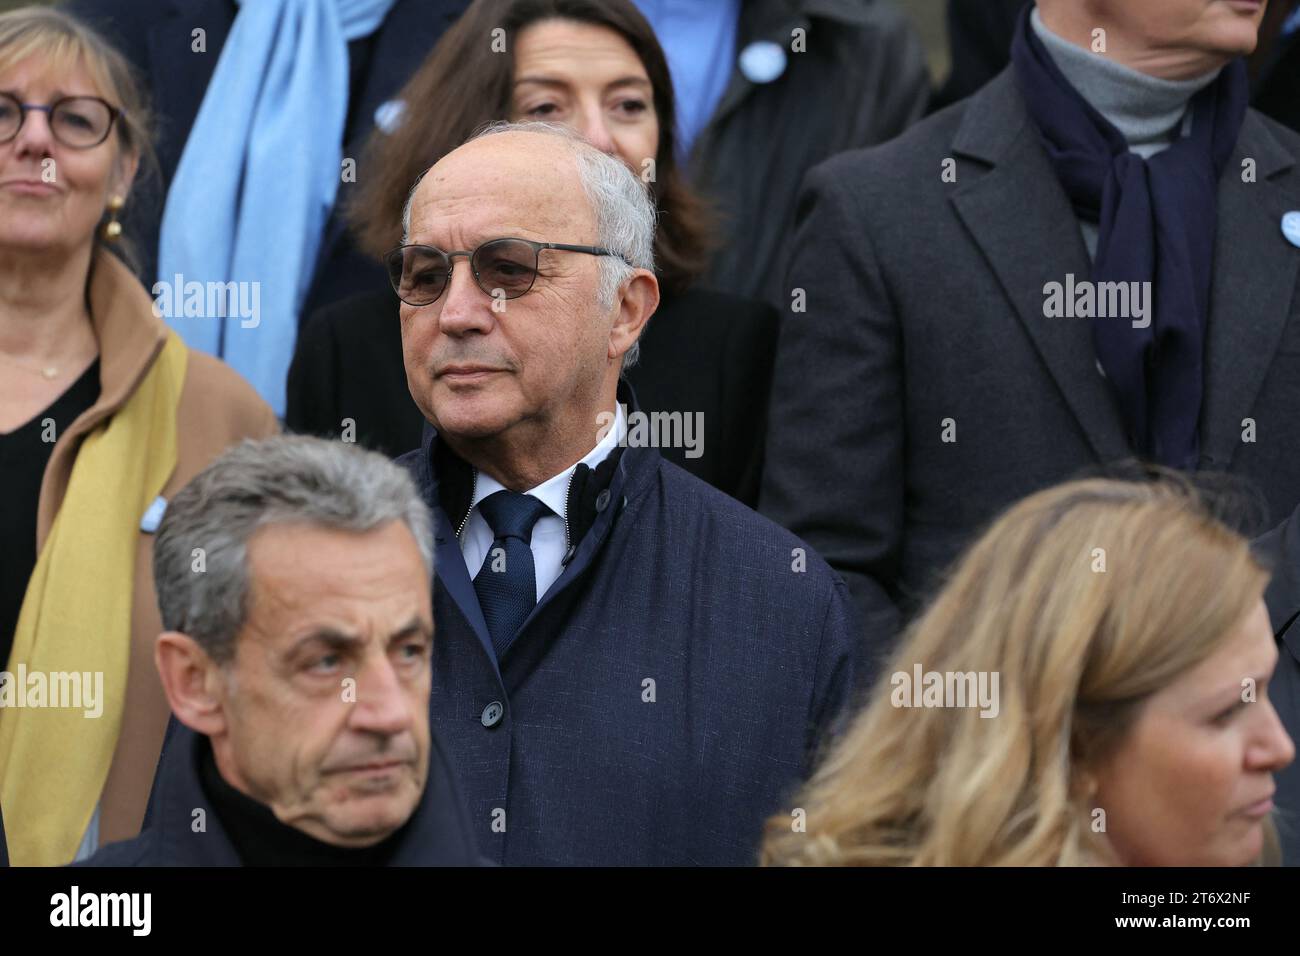 Former French President Nicolas Sarkozy (Front L) and former French prime minister and incumbent President of the Constitutional Council, Laurent Fabius pose for a photograph on the front steps of the Assemblee Nationale parliament building in Paris ahead of a demonstration against anti-Semitism in Paris, on November 12, 2023. Tens of thousands are expected to march Sunday in Paris against anti-Semitism amid bickering by political parties over who should take part and a surge in anti-Semitic incidents across France. Tensions have been rising in the French capital, home to large Jewish and Musl Stock Photo